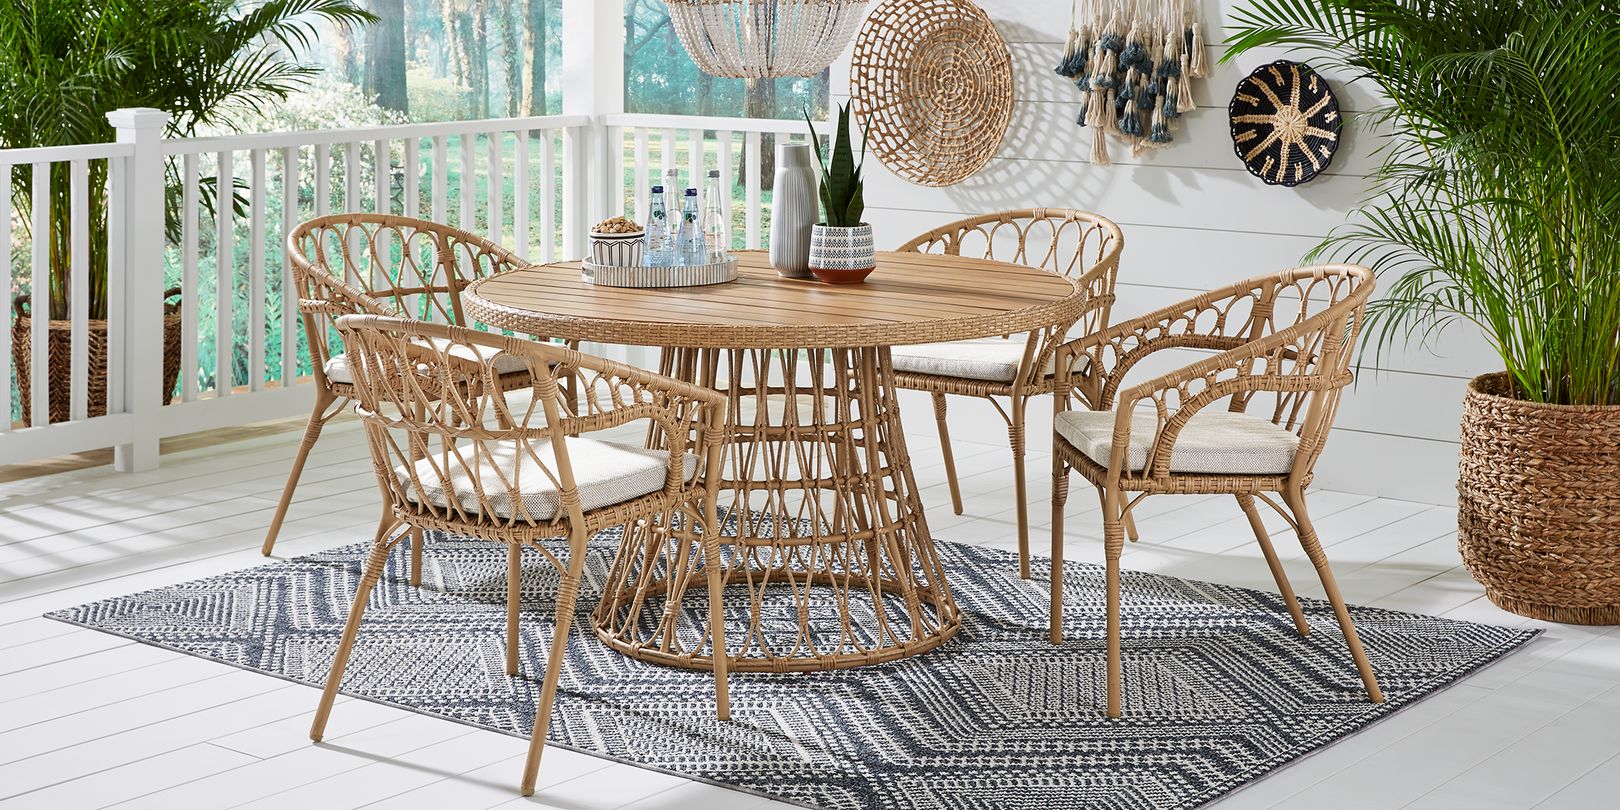 Photo of a round rattan outdoor dining table and chairs